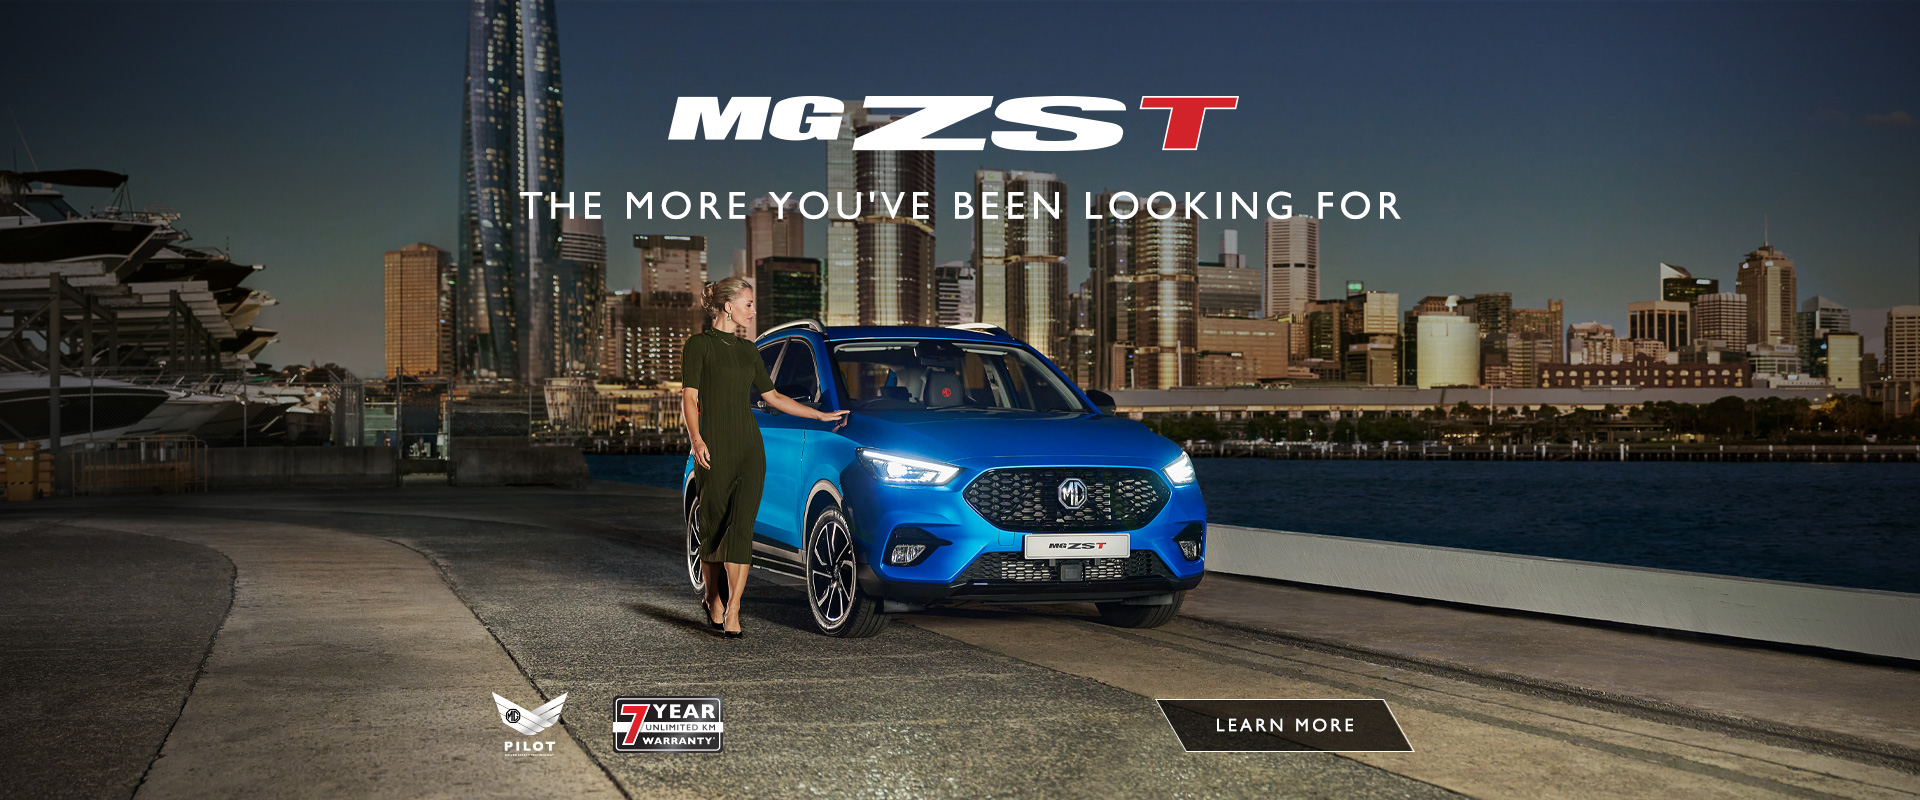 MG ZST. The more you've been looking for.